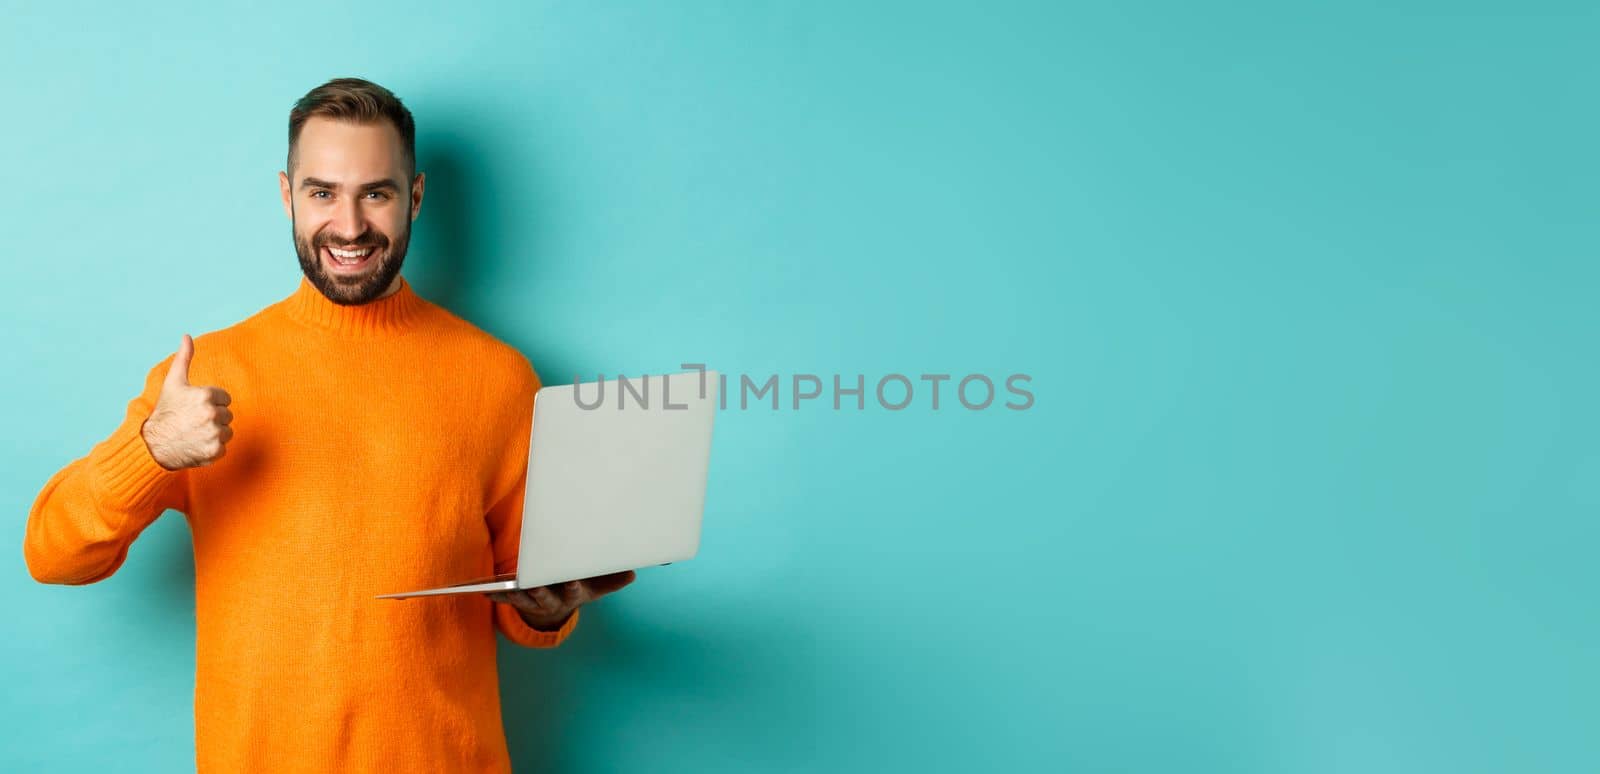 Freelance and technology concept. Lucky man in orange sweater, showing thumb up while working with laptop, standing satisfied over light blue background.